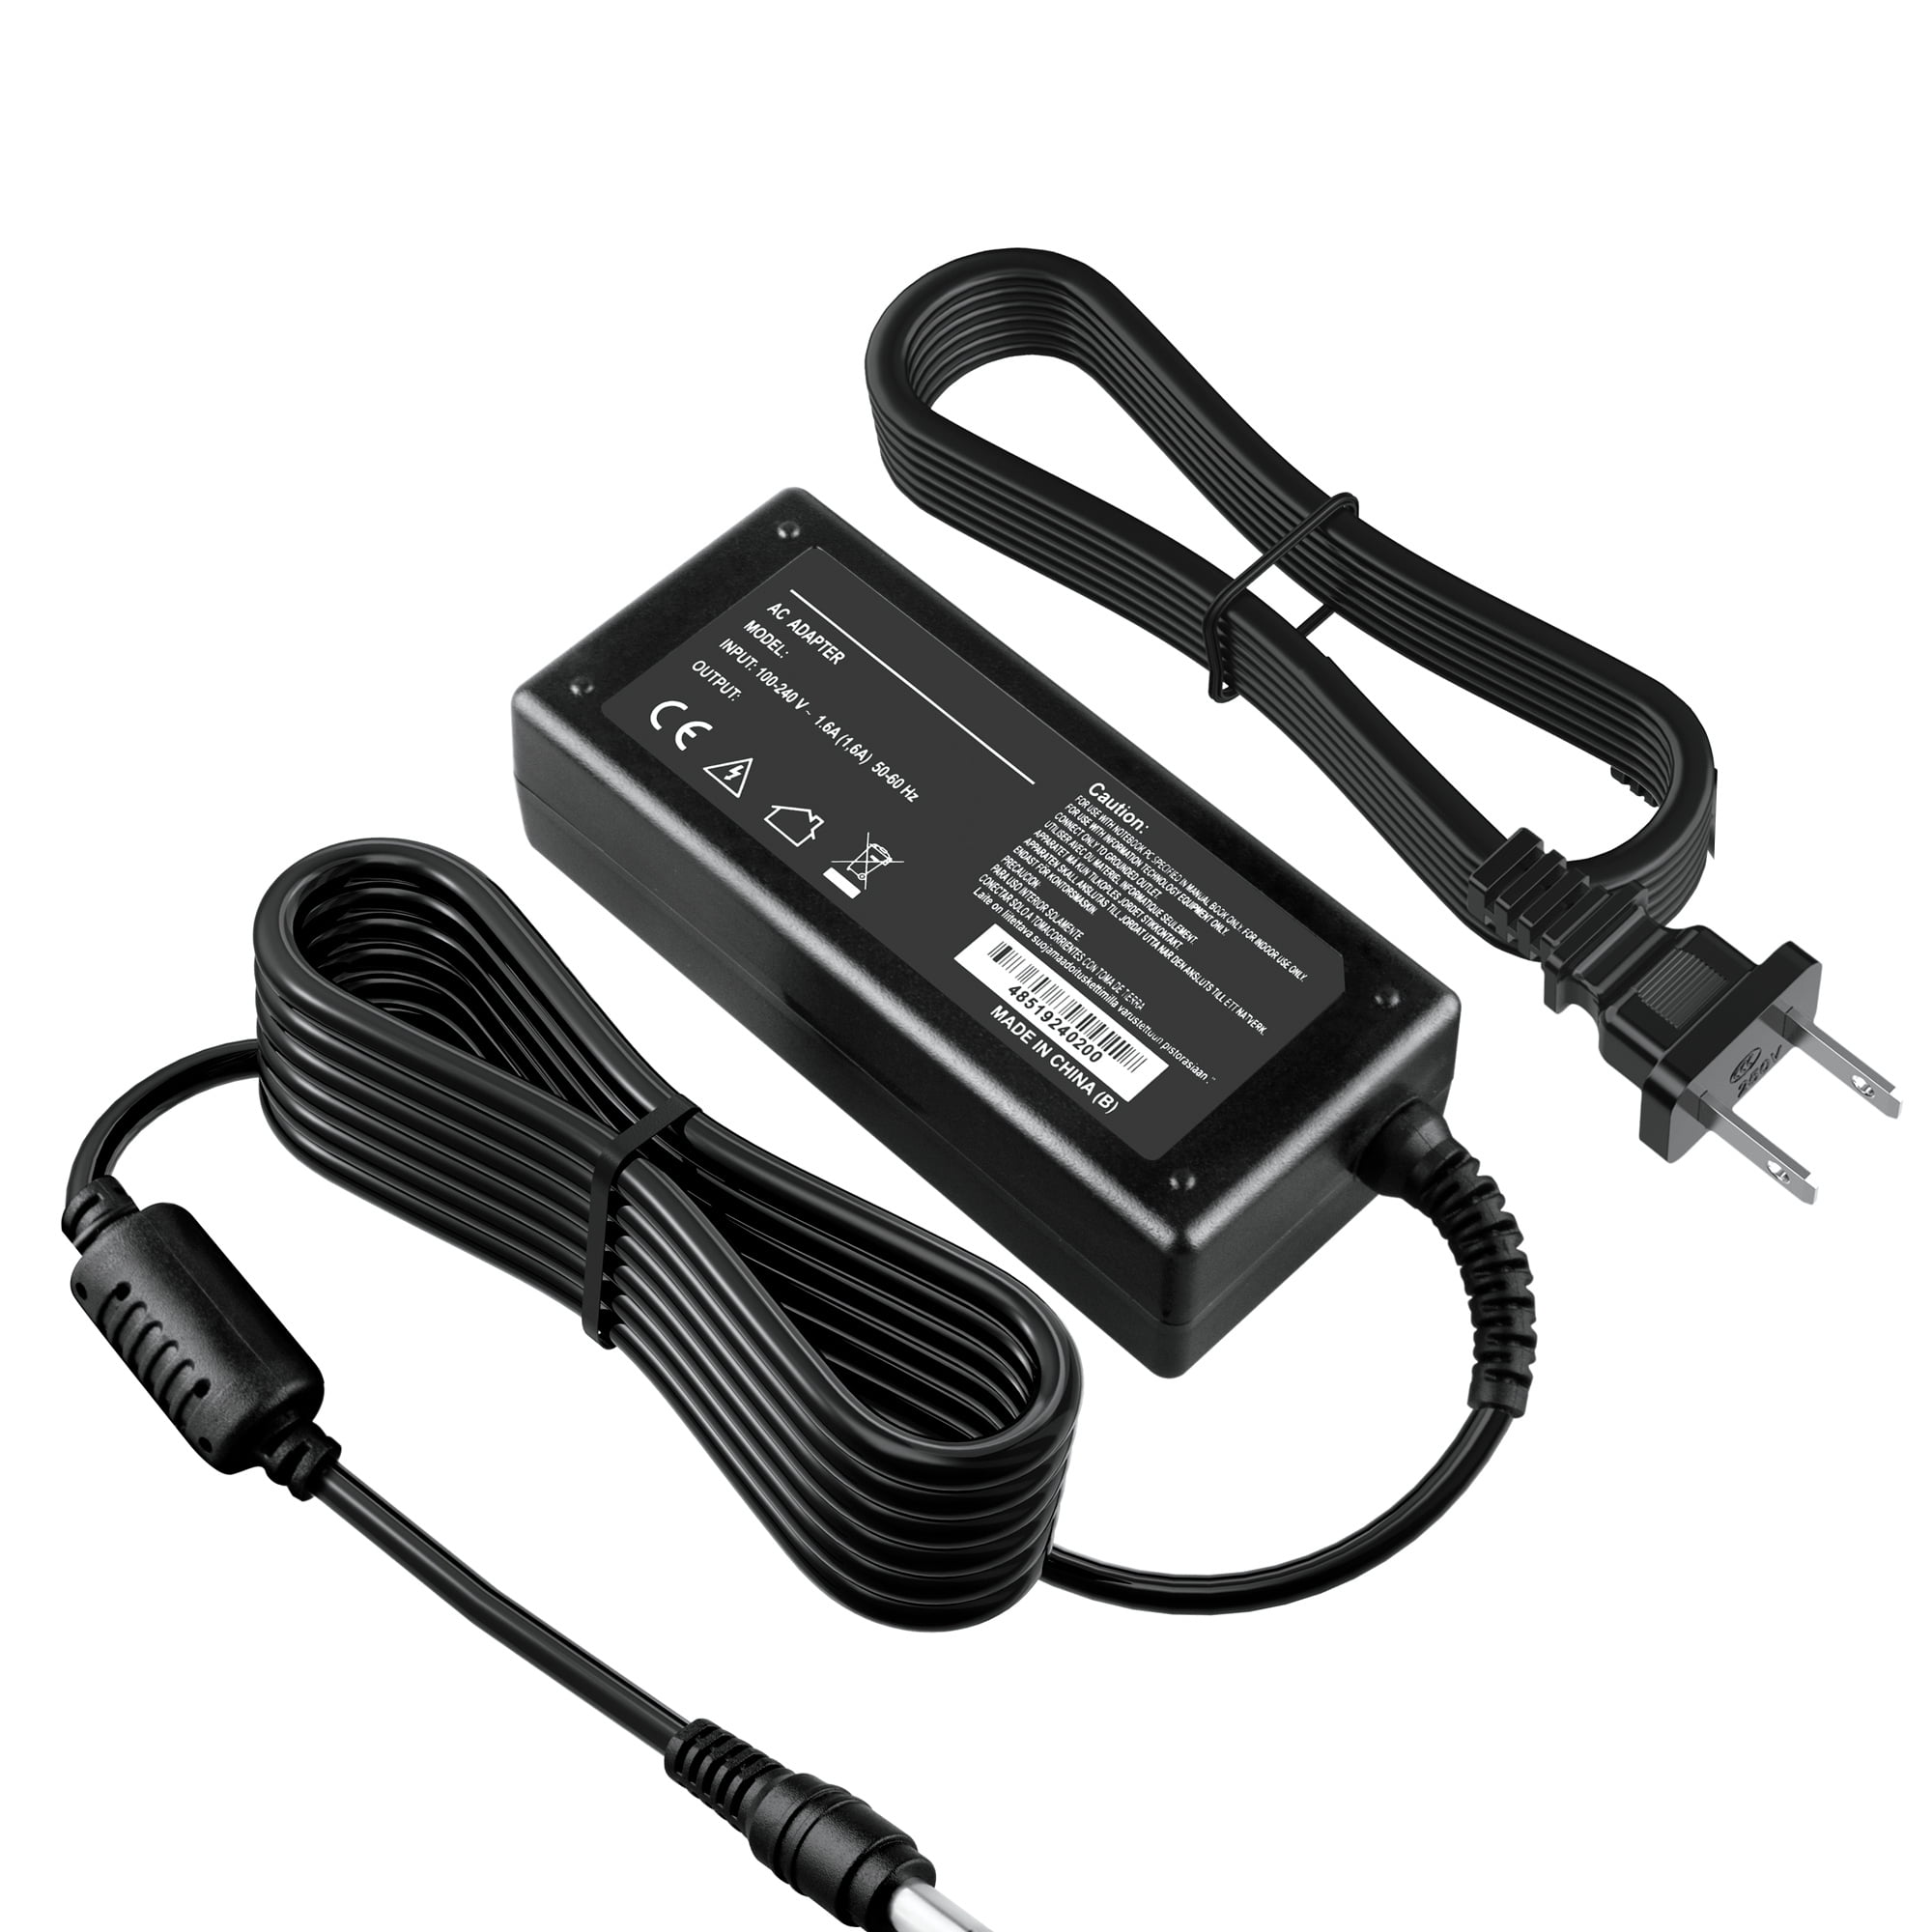 PORT Connect Universal Power Supply (150W) - Chargeur PC portable